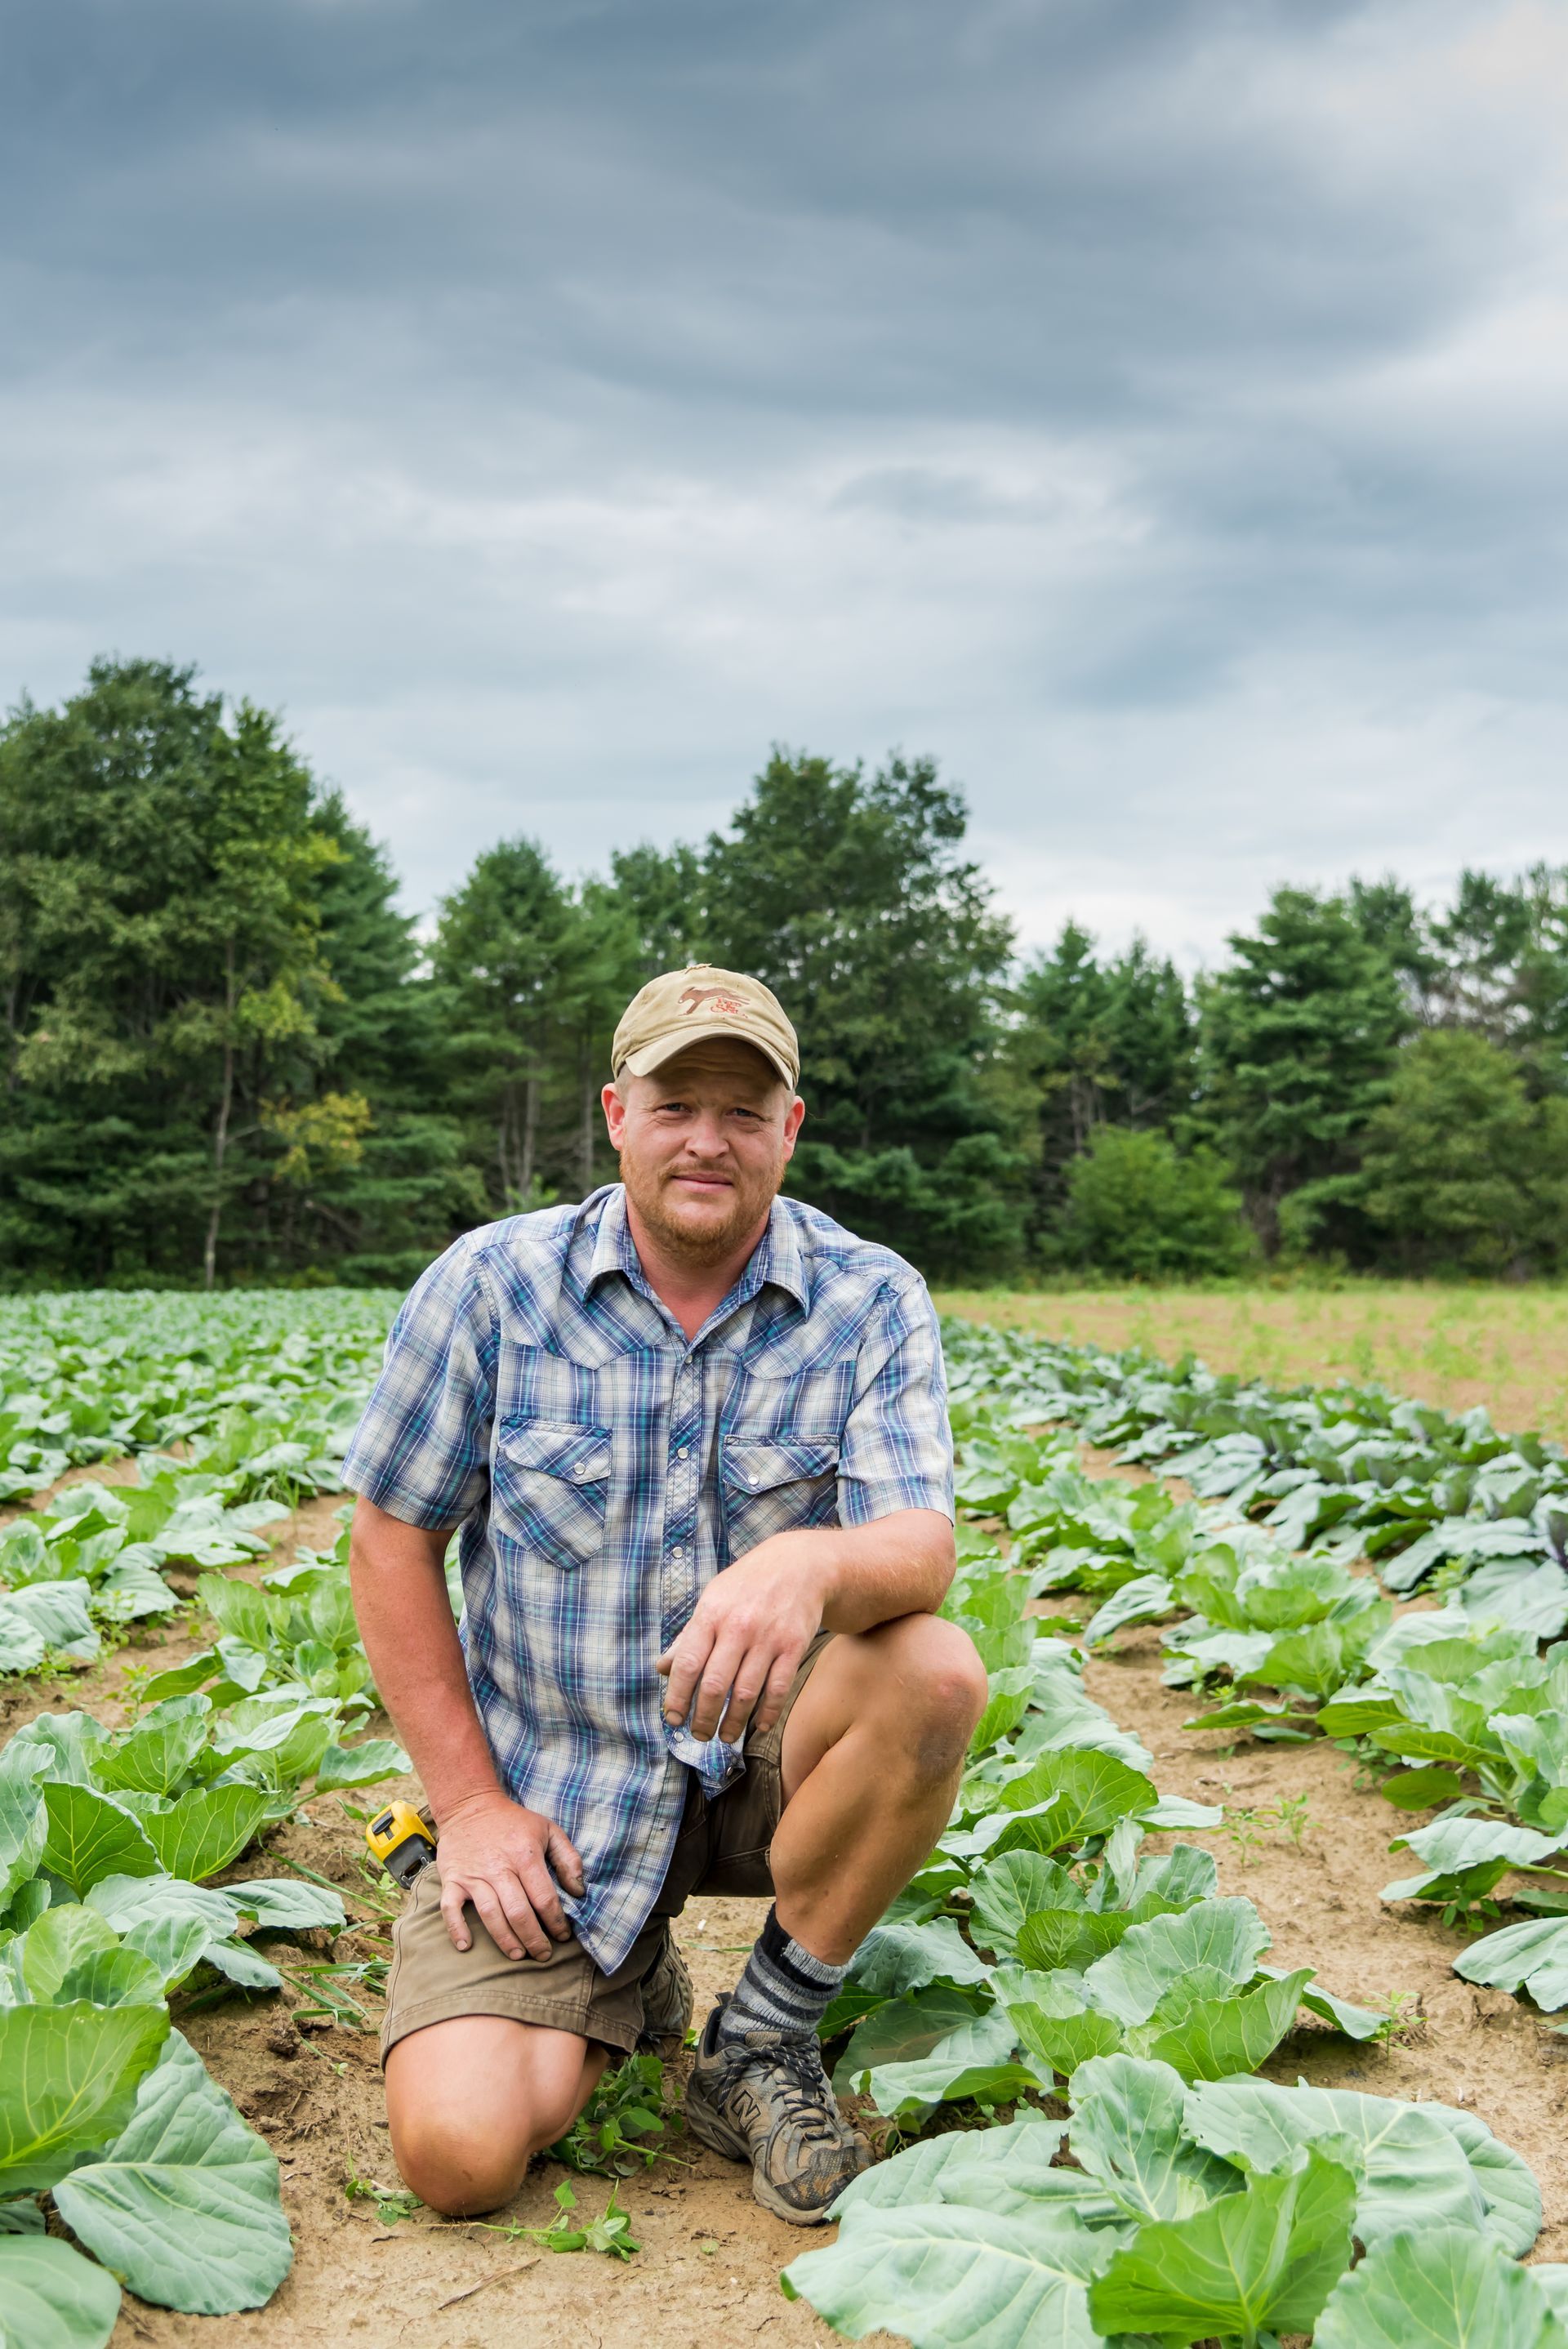 A man in a plaid button down shirt and baseball cap crouching in a field of greens.